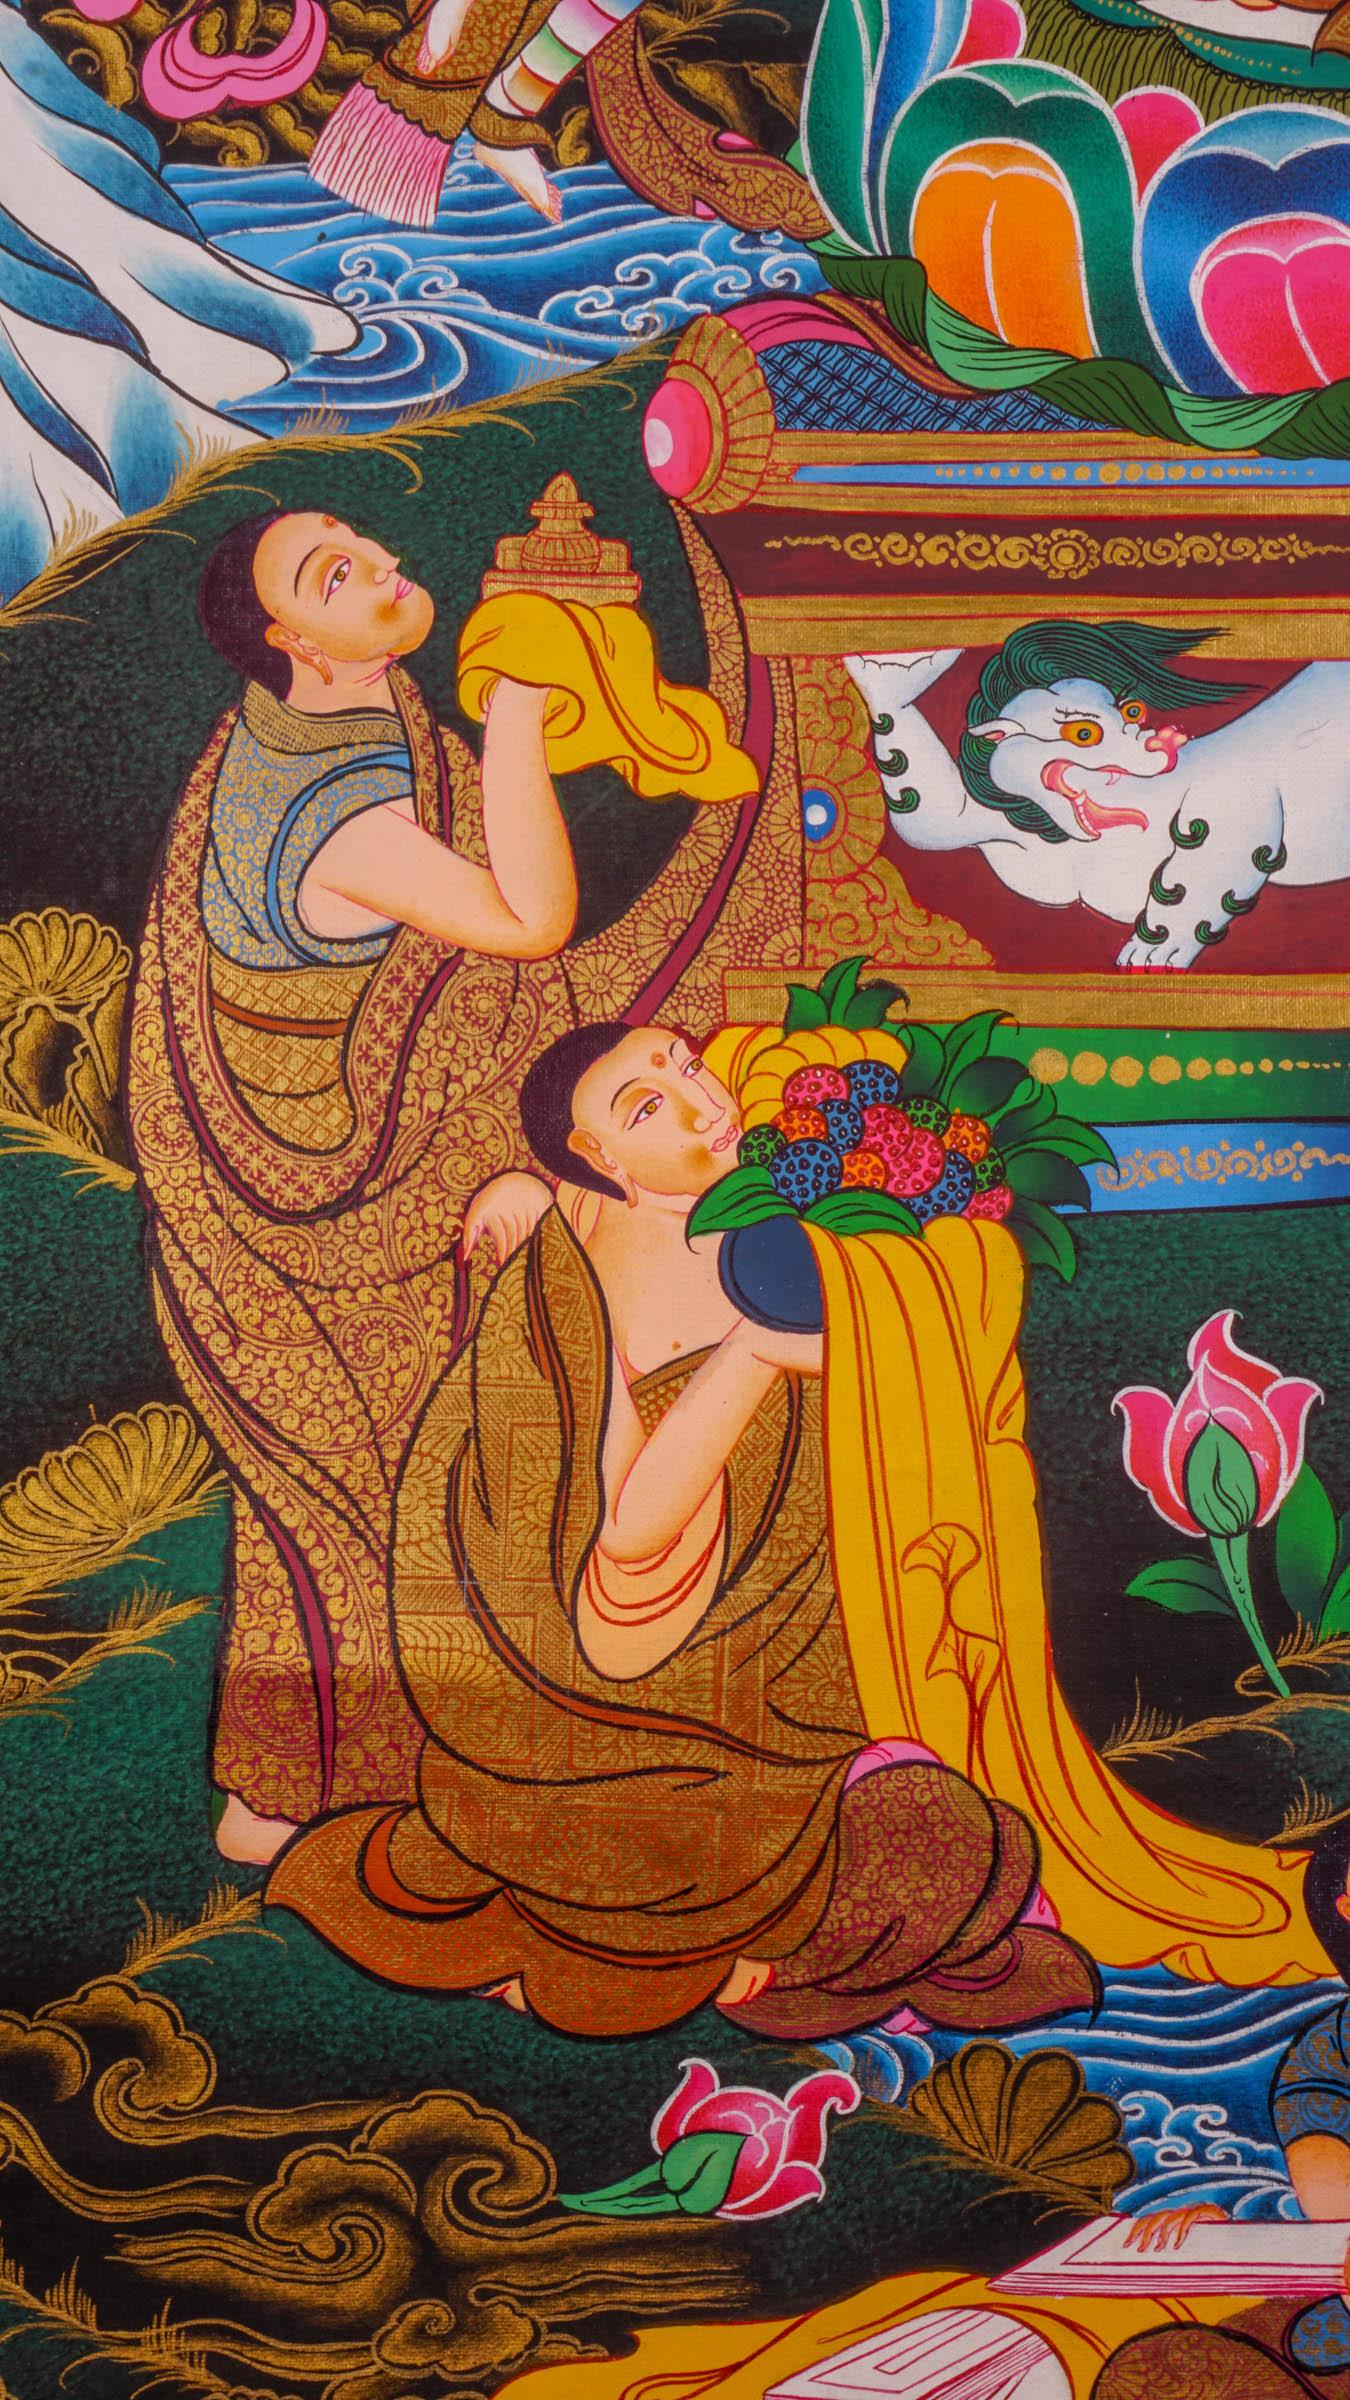 Chungapa Thangka painting on cotton canvas for wall hanging . This is a master piece art of Chungapa and his followers offering.